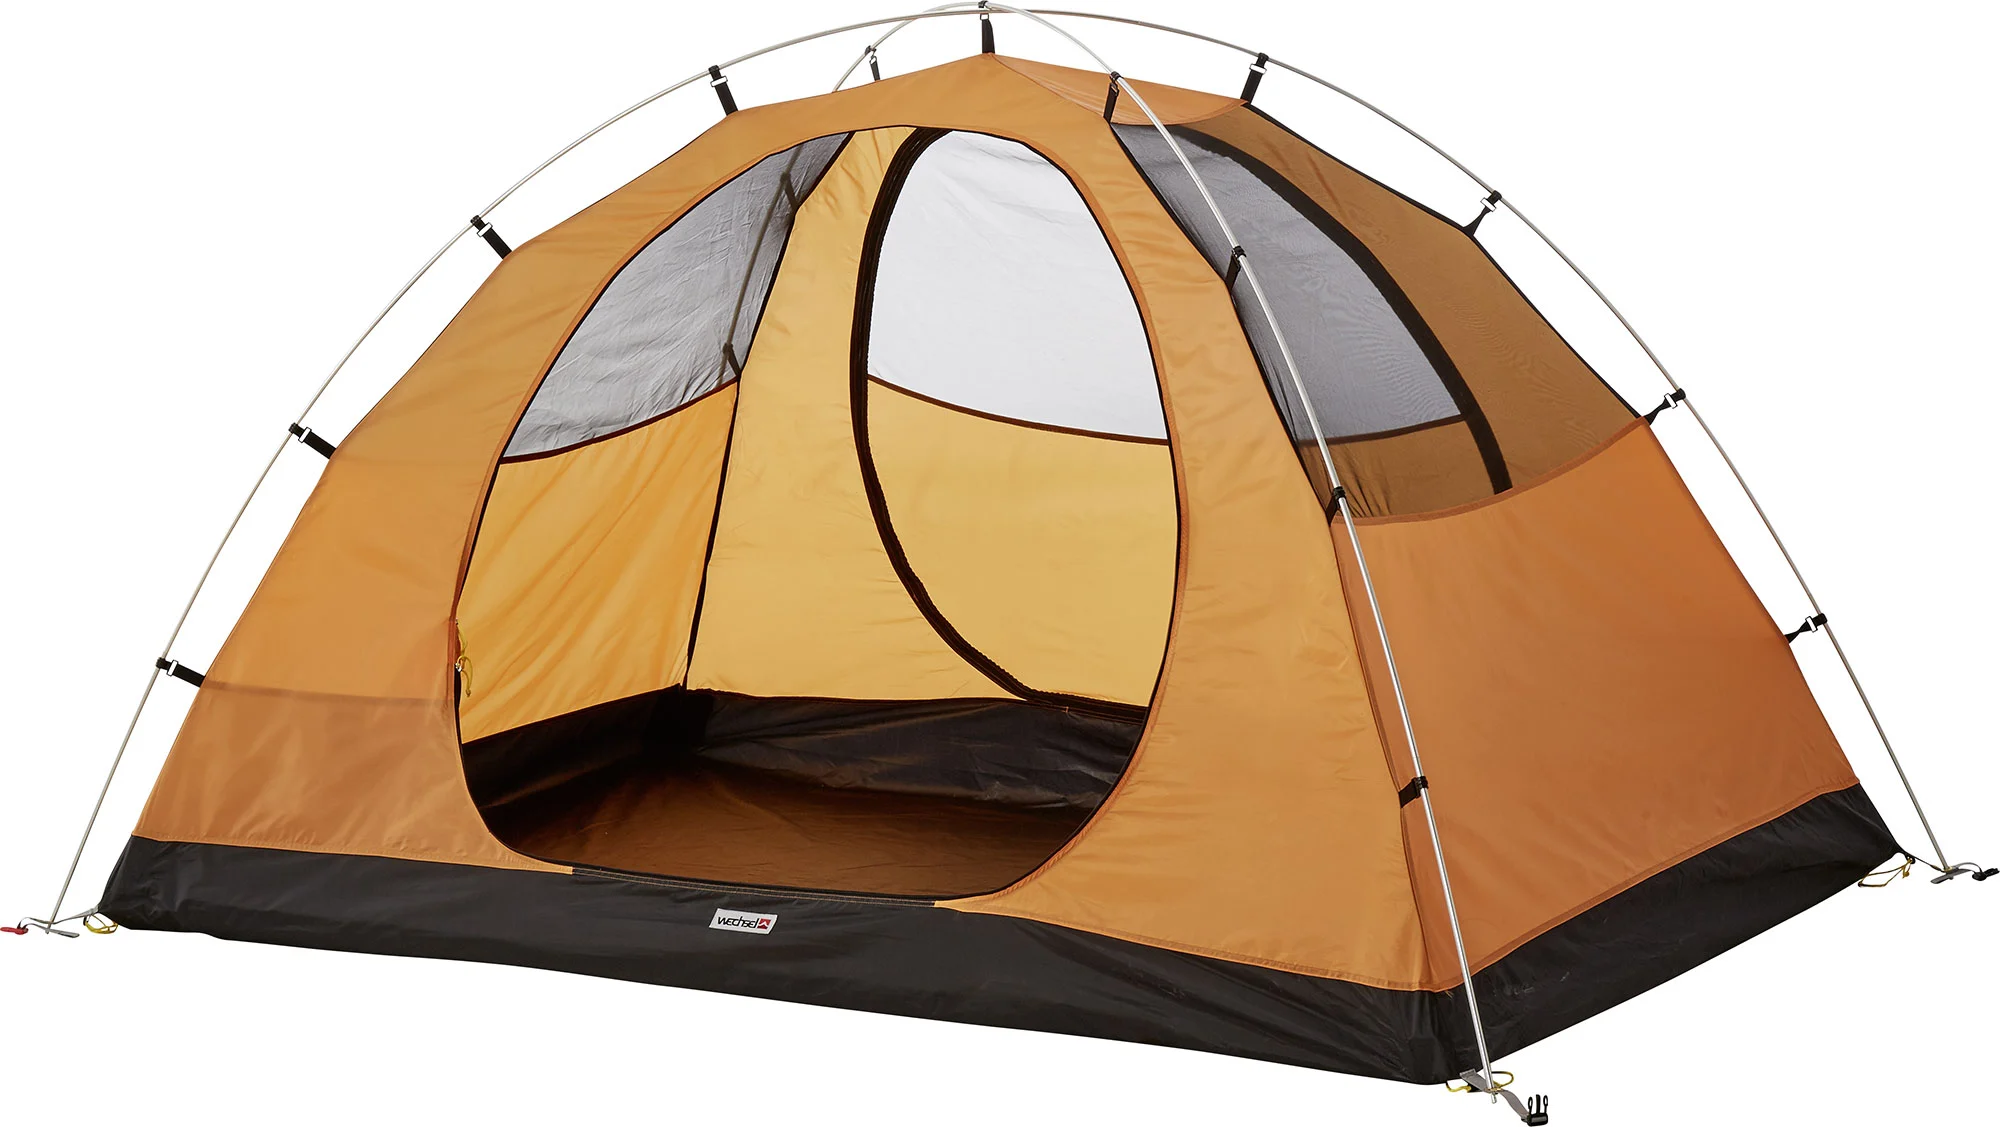 WECHSEL LE DOME TENT